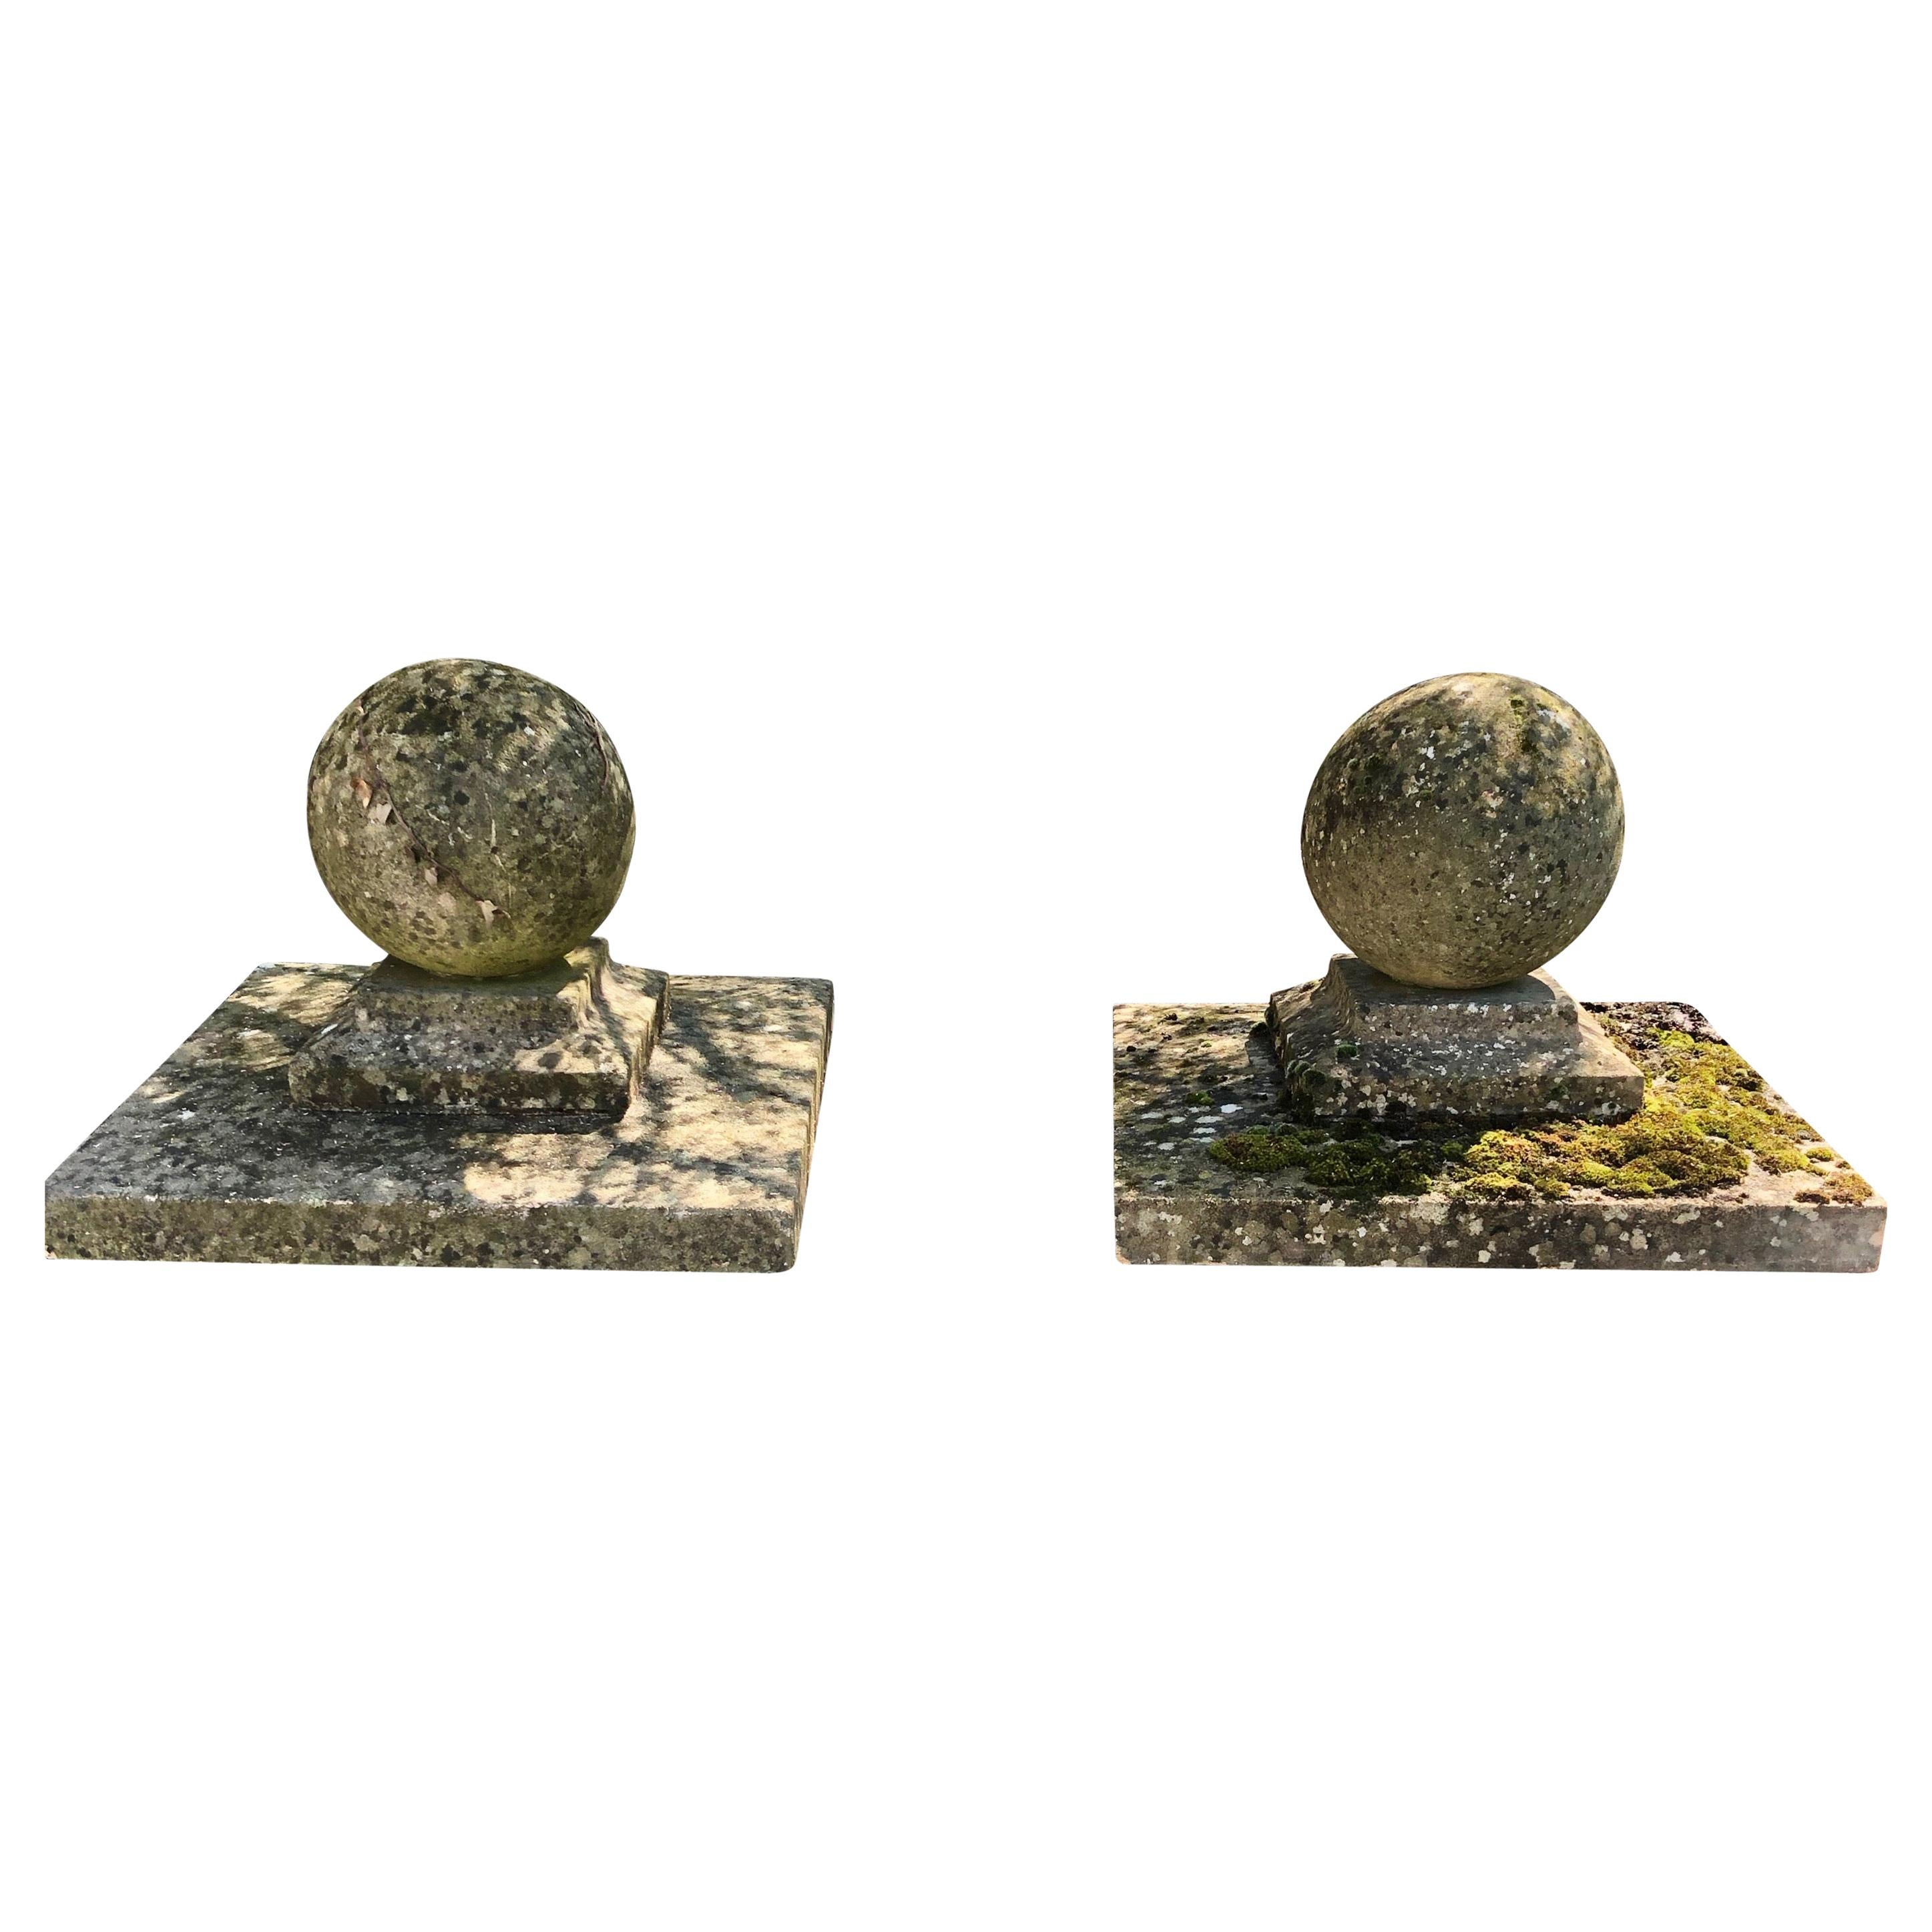 Pair of Large English Cast Stone Ball Gate Pier Finials #1